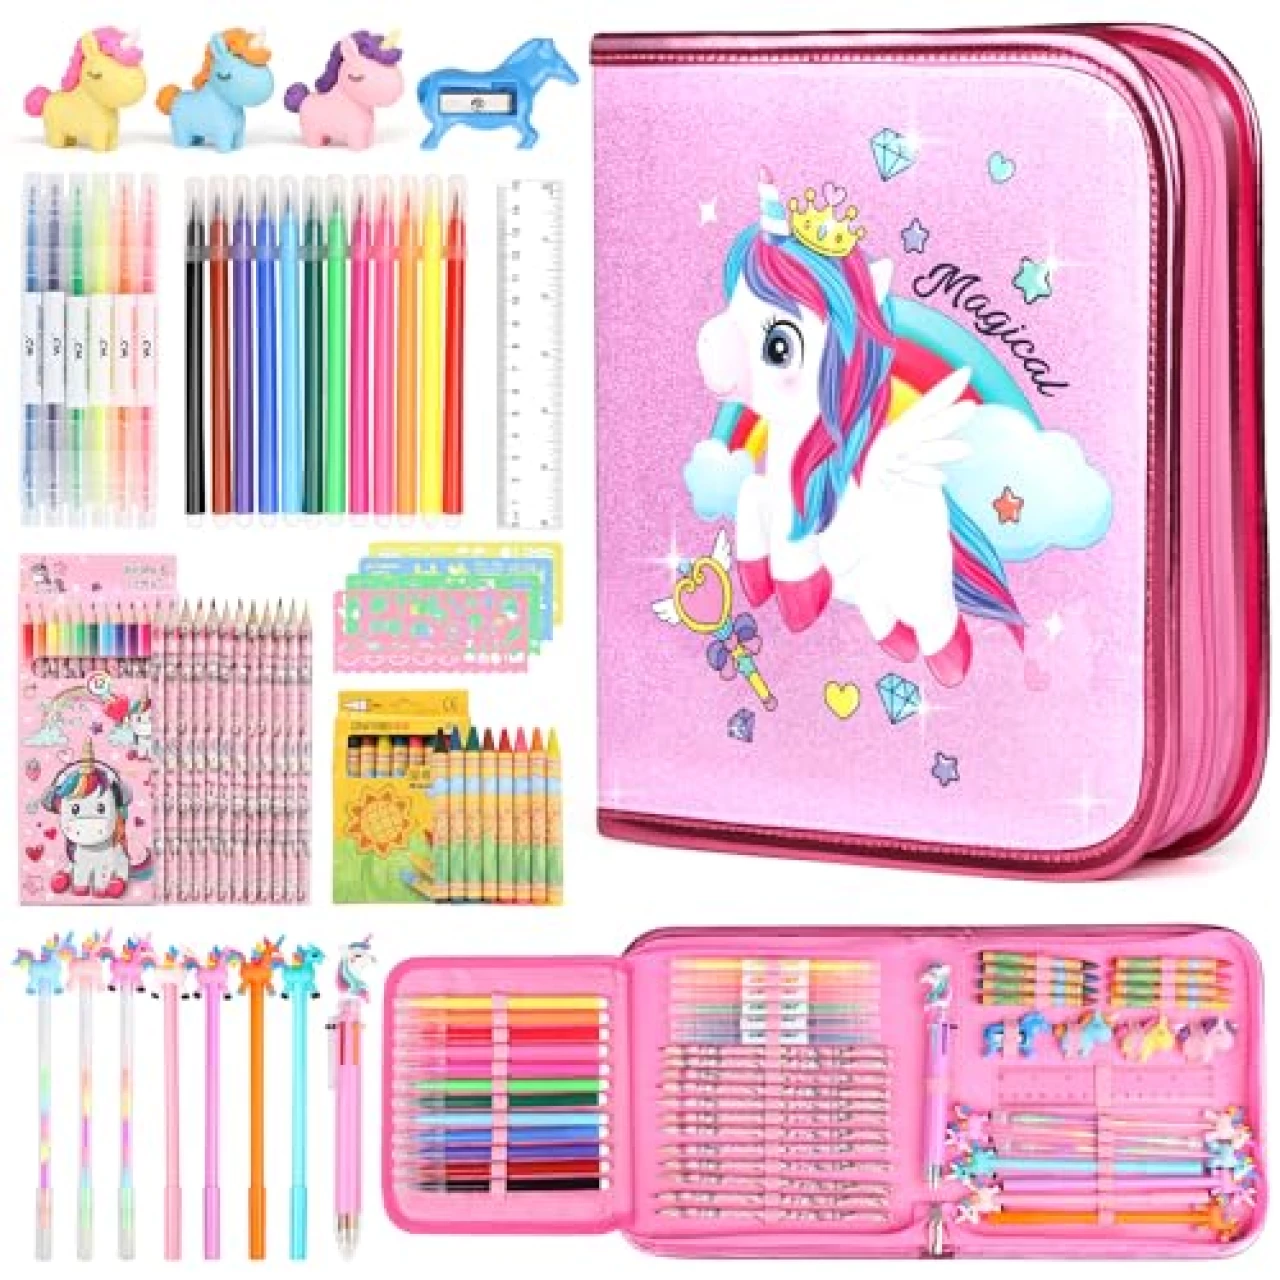 beefunni Unicorn Fruit Scented Markers Set 56 Pcs, Art Supplies for Kids 4-6-8, Arts and Crafts Coloring Set, Markers Pencil Crayon&amp;Gel Pen Drawing Kits - Birthday Gifts for Girls 4 5 6 7 8 Year Old